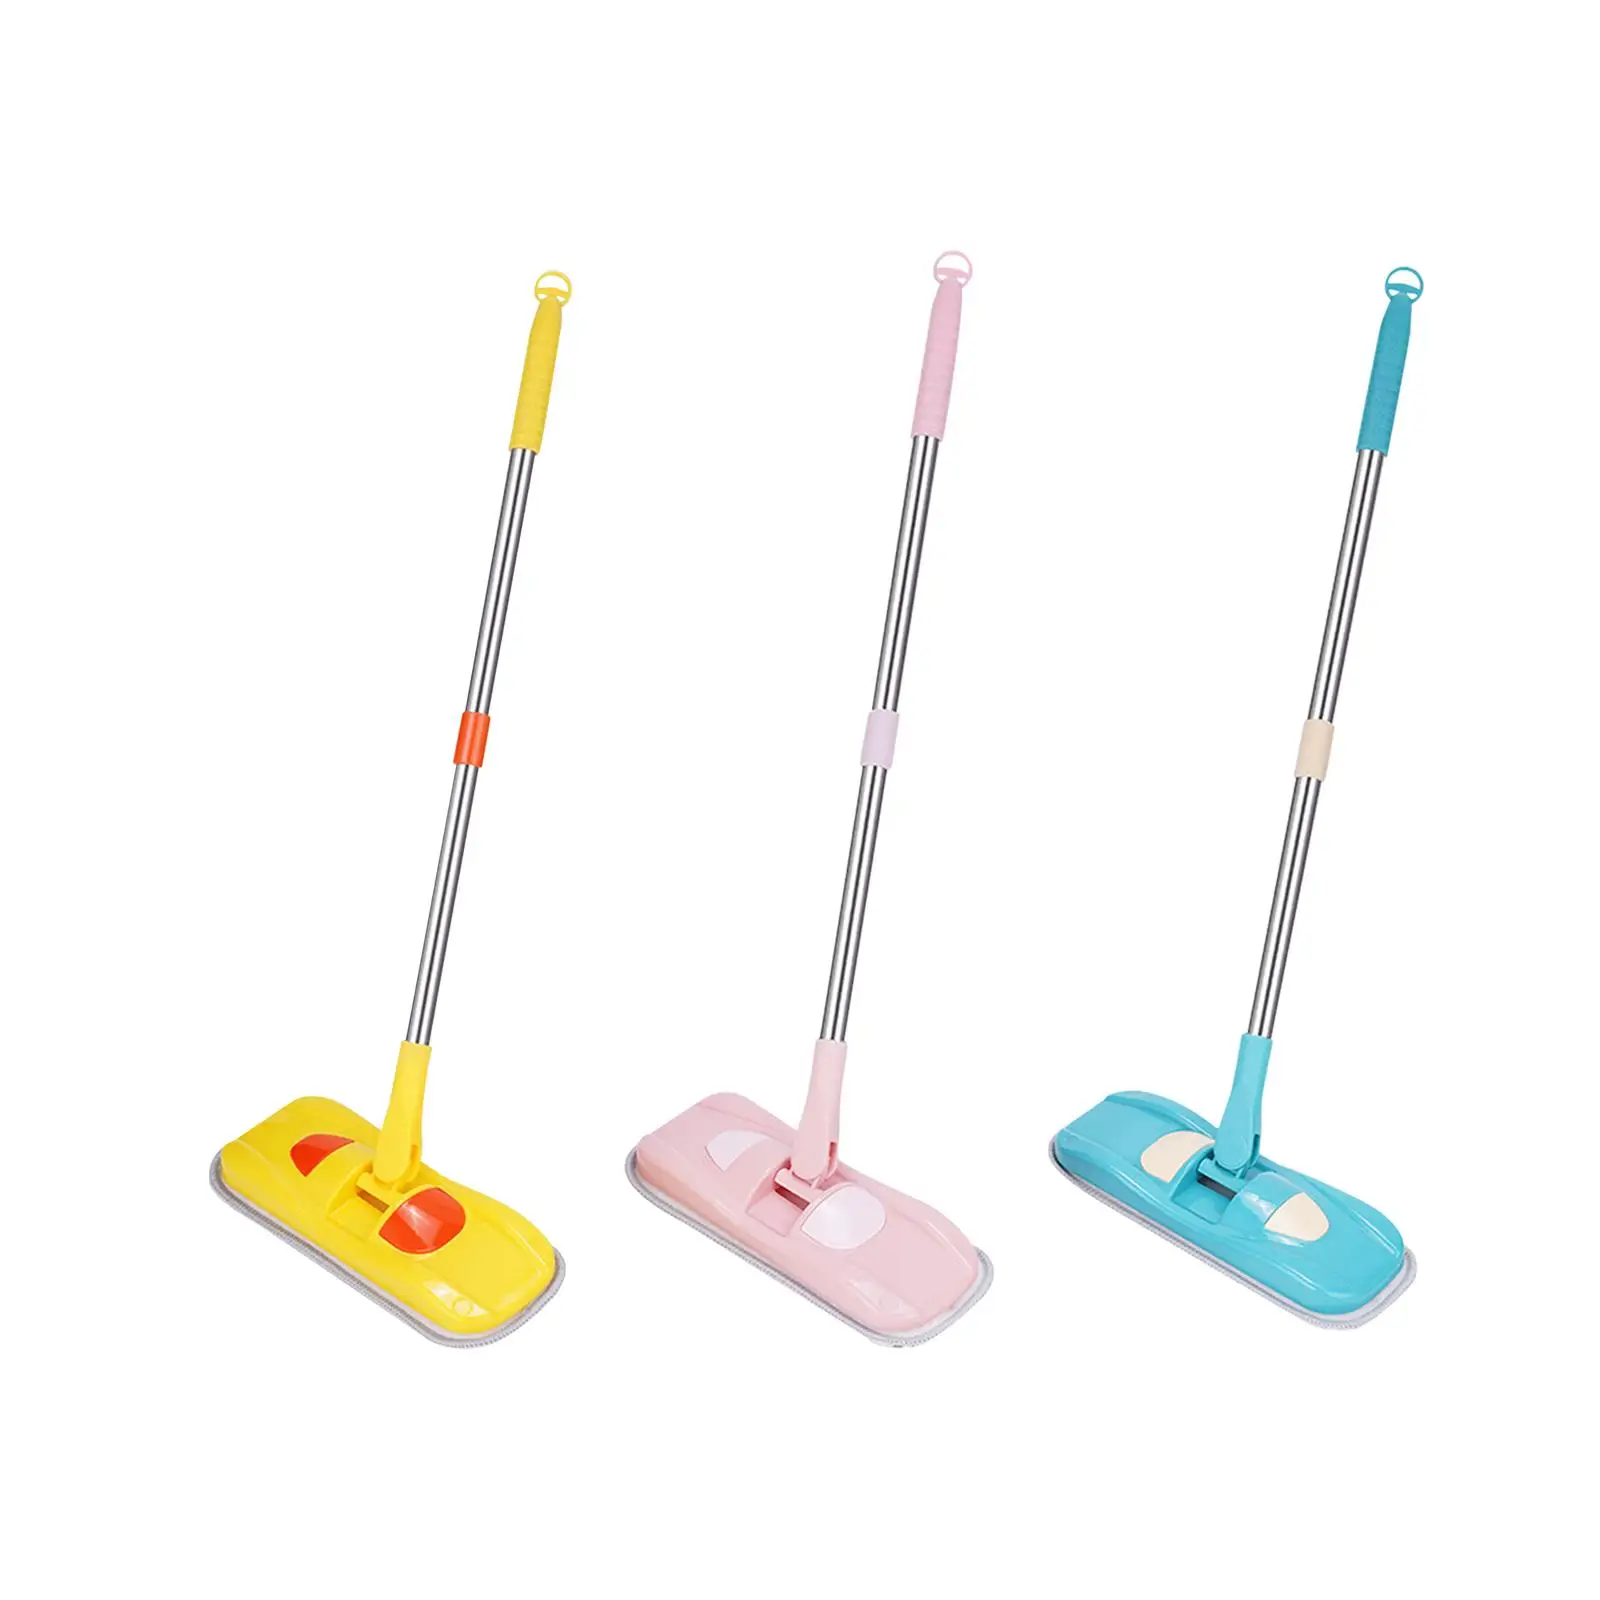 Little Housekeeping Helper Tool Role Playing Early Learning Toddlers Cleaning Toys Mini Kids Mop for Preschool Age 3-6 Years Old